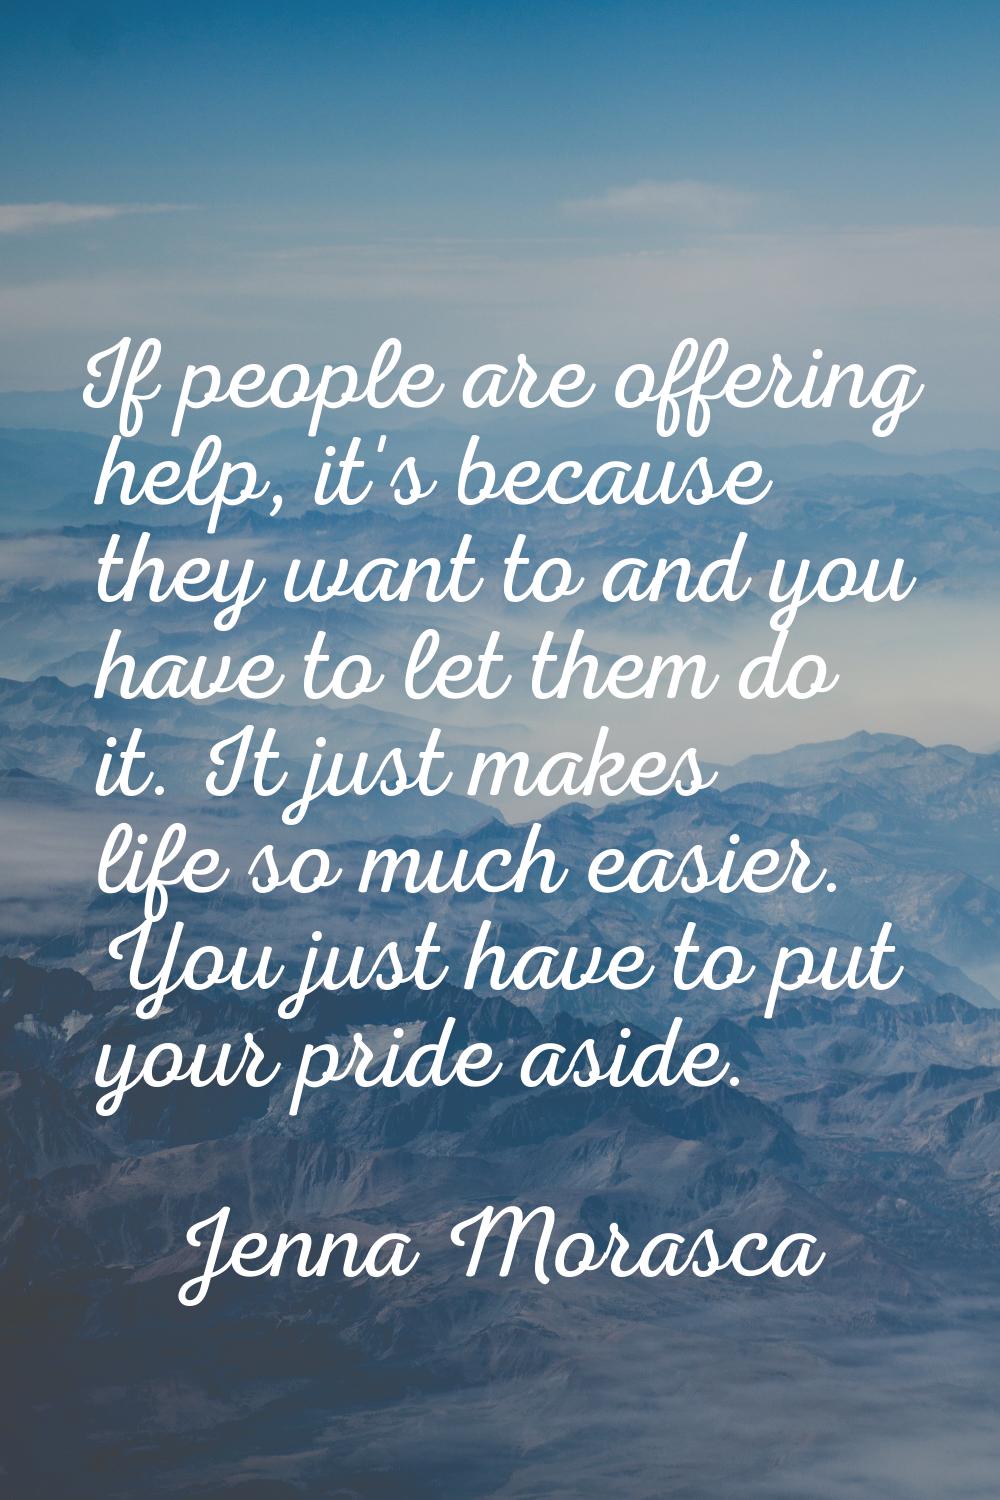 If people are offering help, it's because they want to and you have to let them do it. It just make